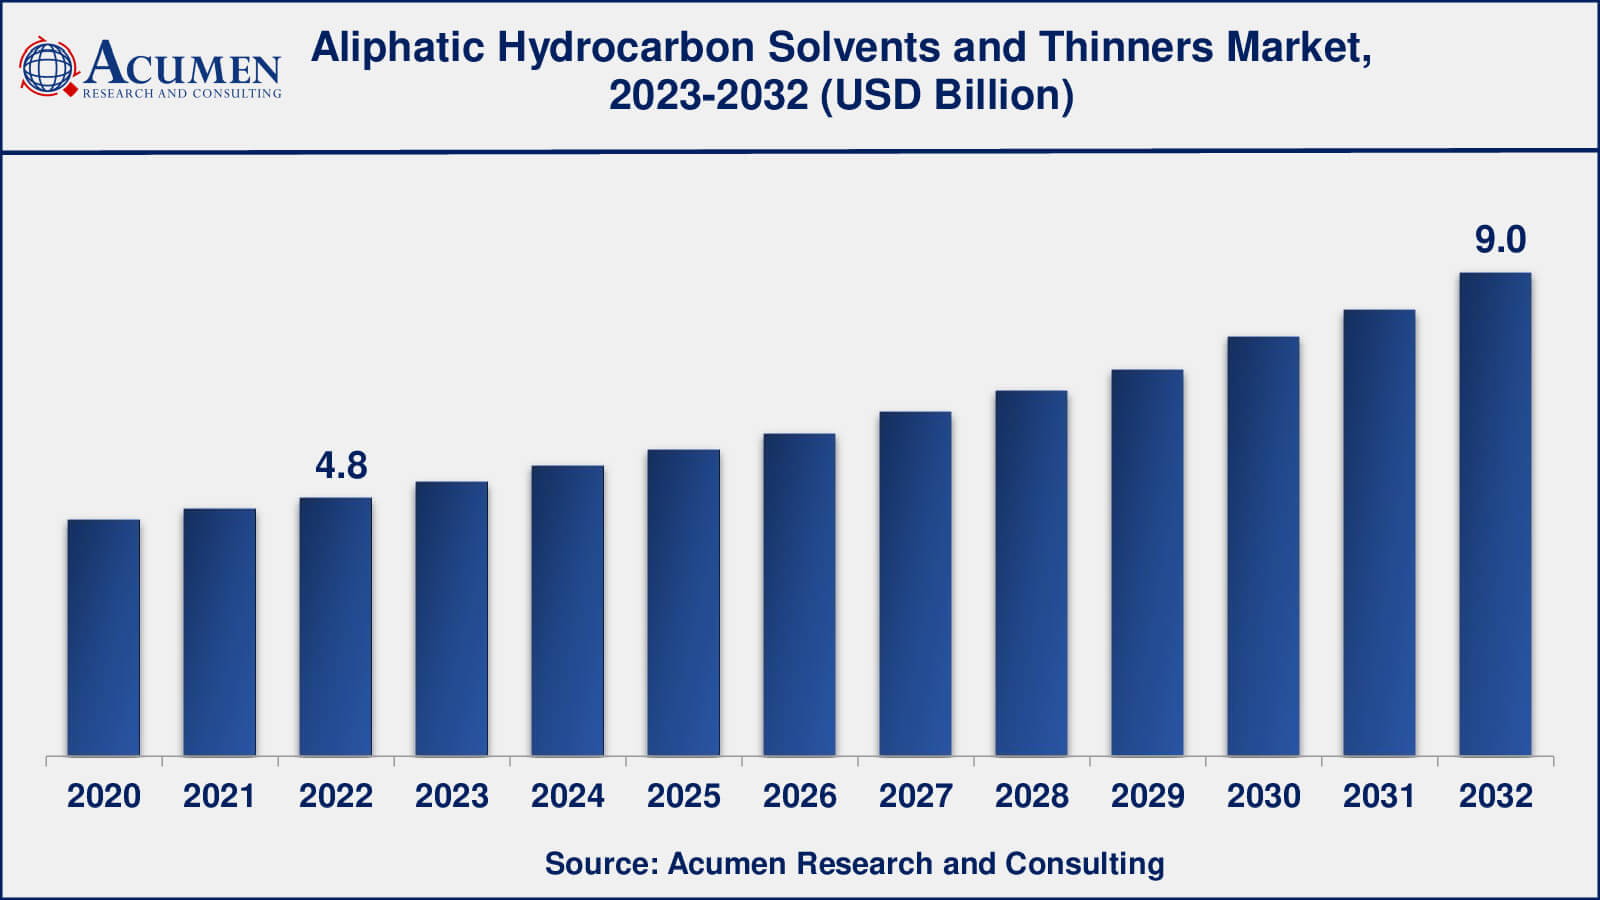 Global Aliphatic Hydrocarbon Solvents and Thinners Market Dynamics